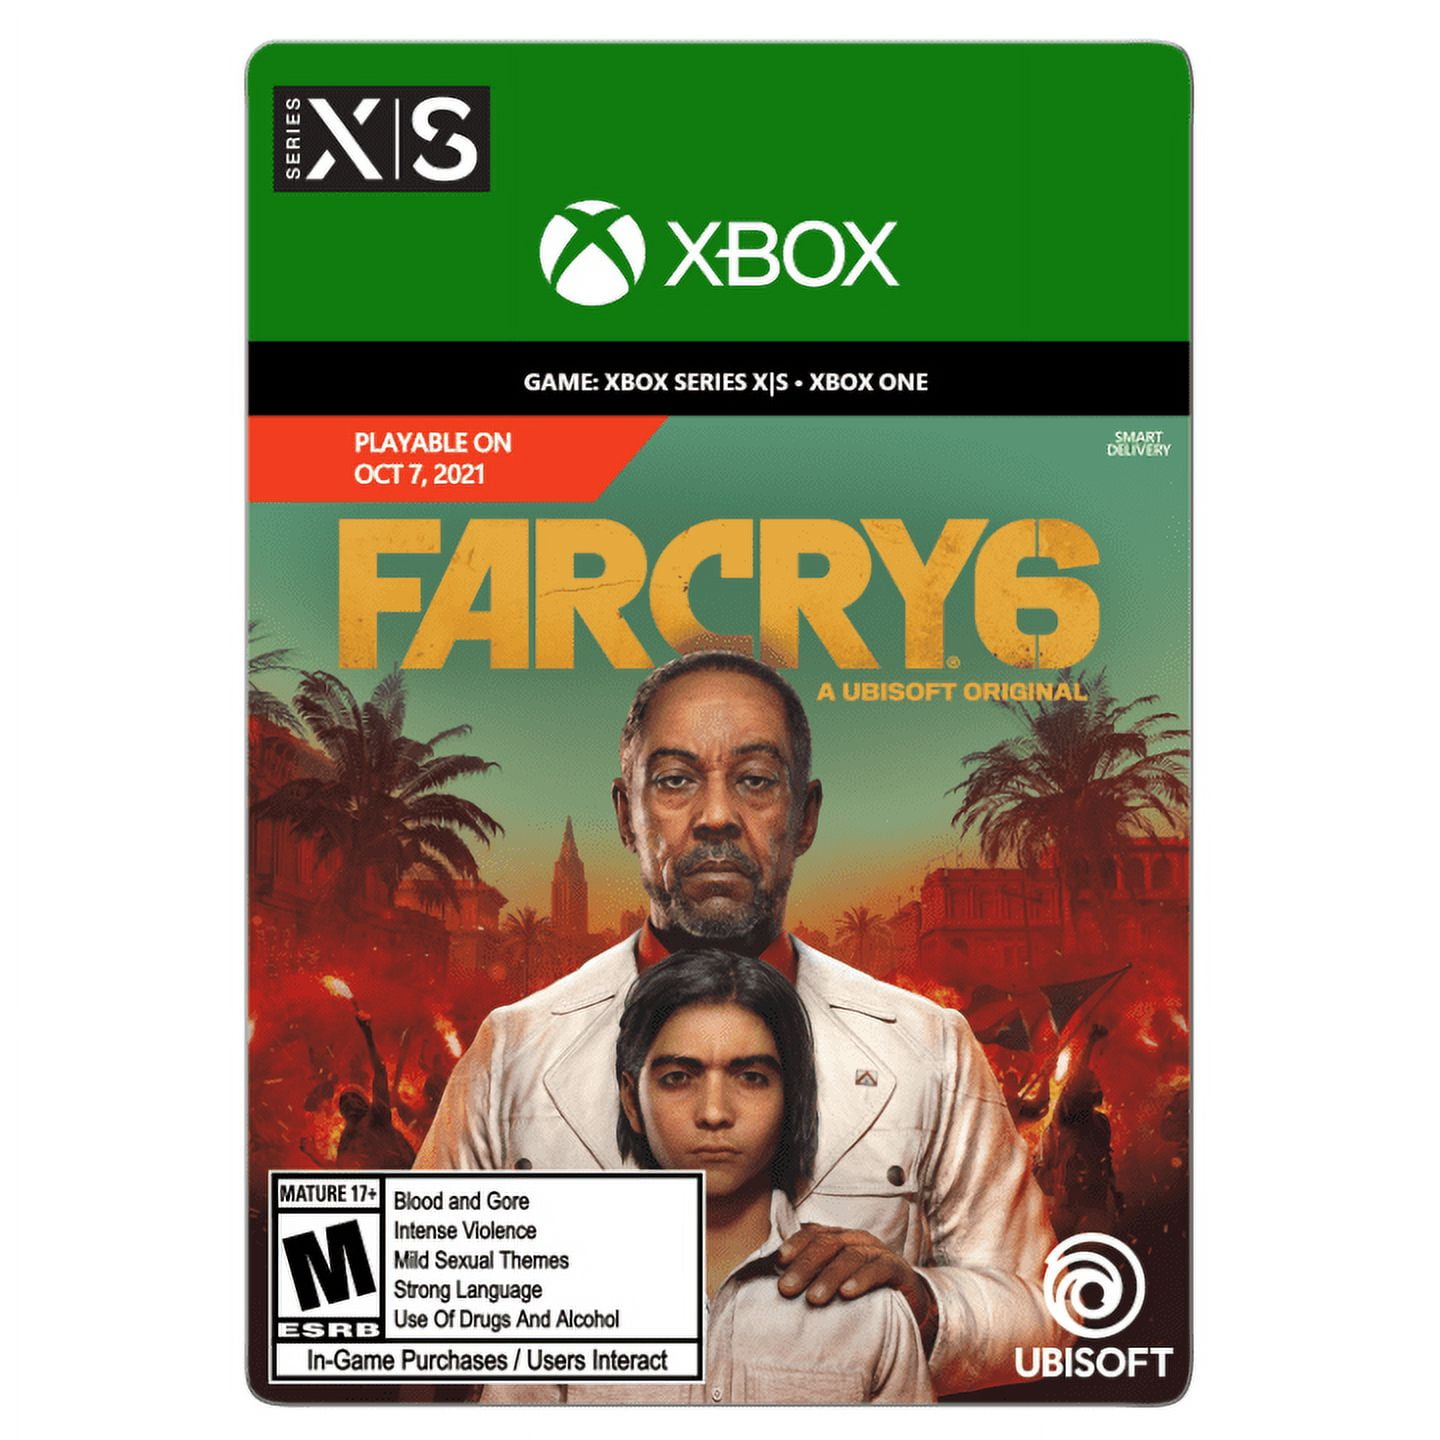 Enter for Your Chance to Win a Custom Far Cry 6 Xbox Series X - Xbox Wire